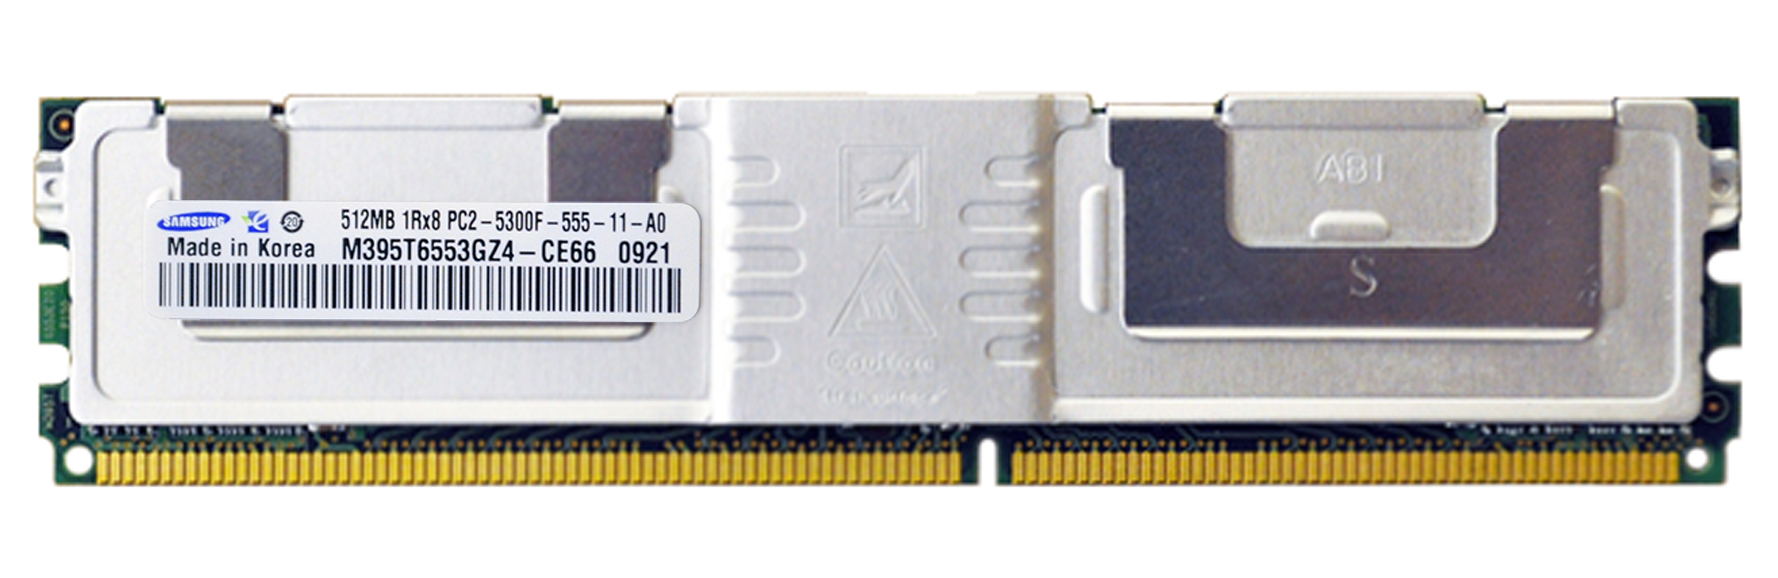 EM160AA-AM Memory Upgrades 1GB PC2-5300 DDR2-667MHz ECC Fully Buffered CL5 240-Pin DIMM Low Voltage Dual Rank Memory Module